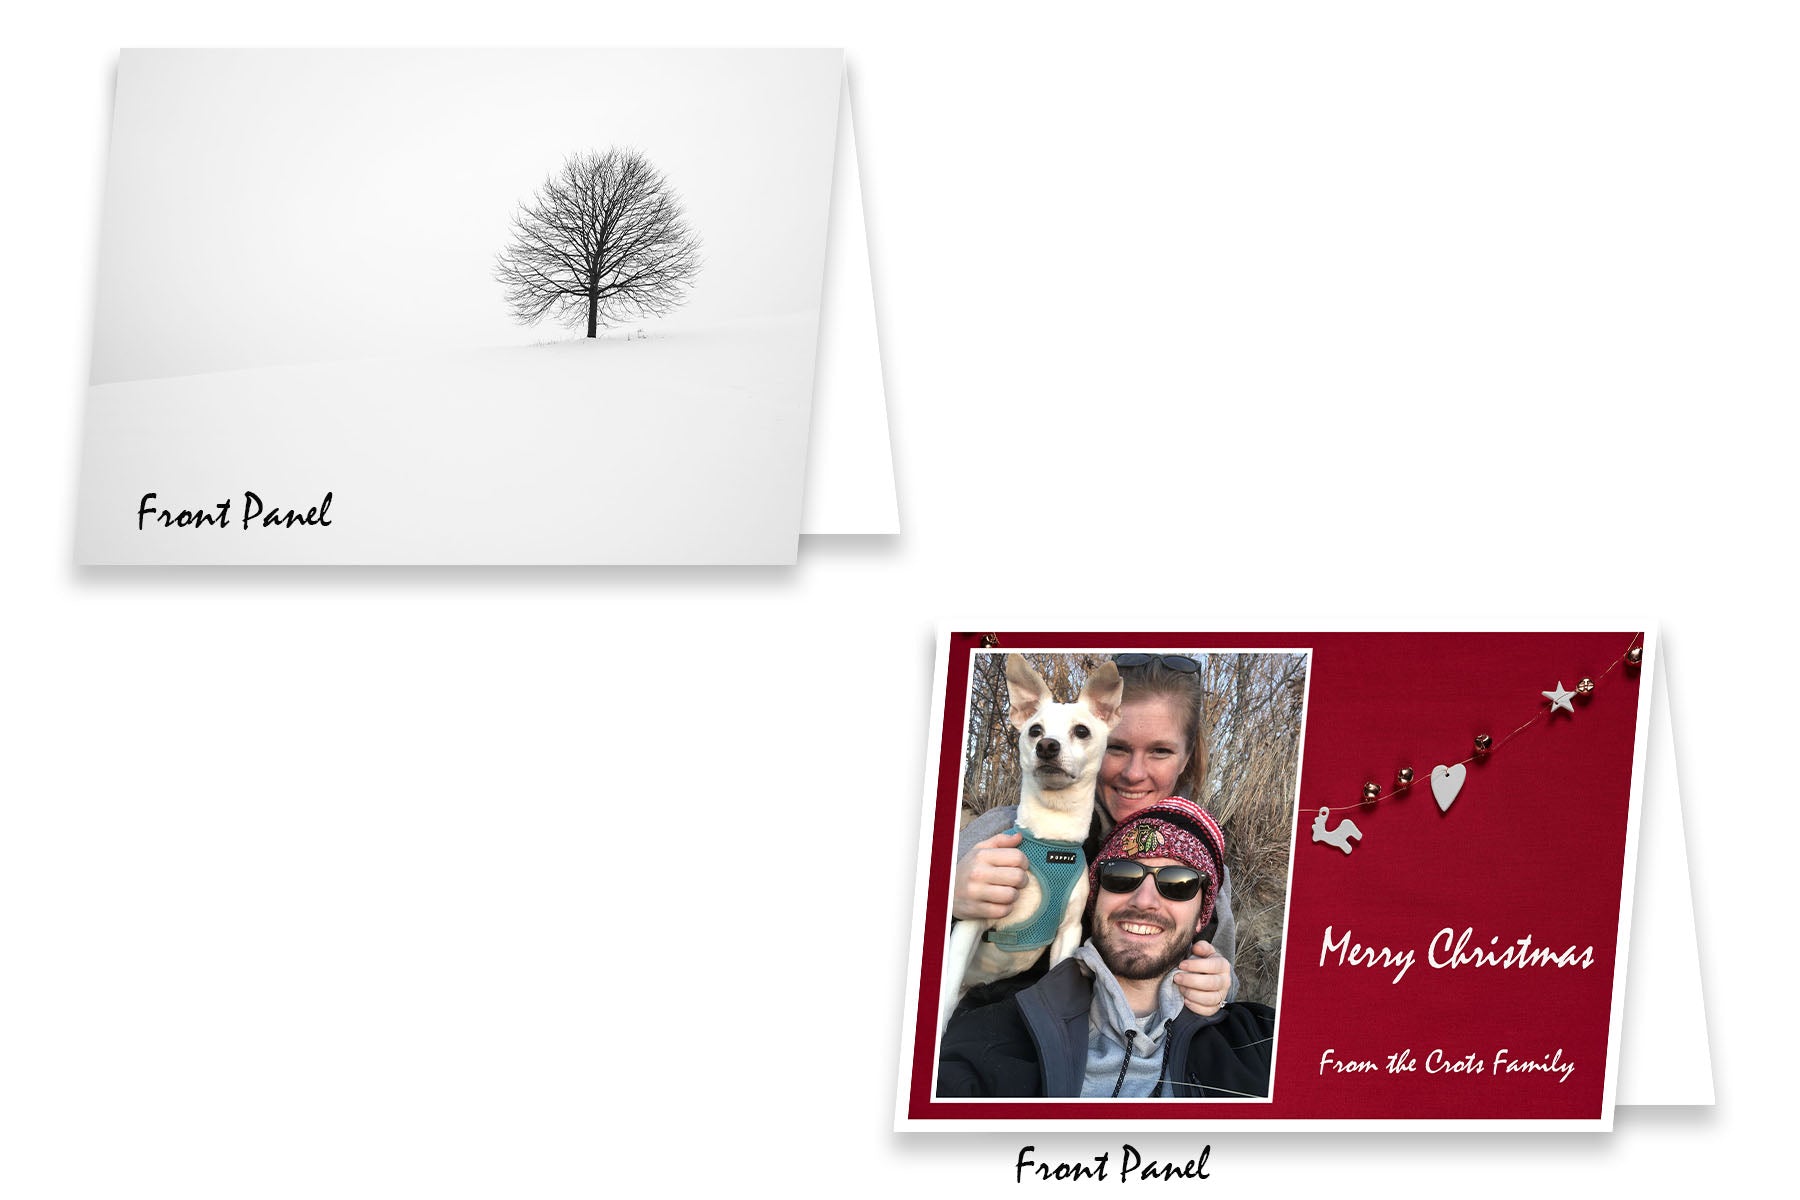 Upload and Print 5x7 Holiday DIY Folded Cards on Discount